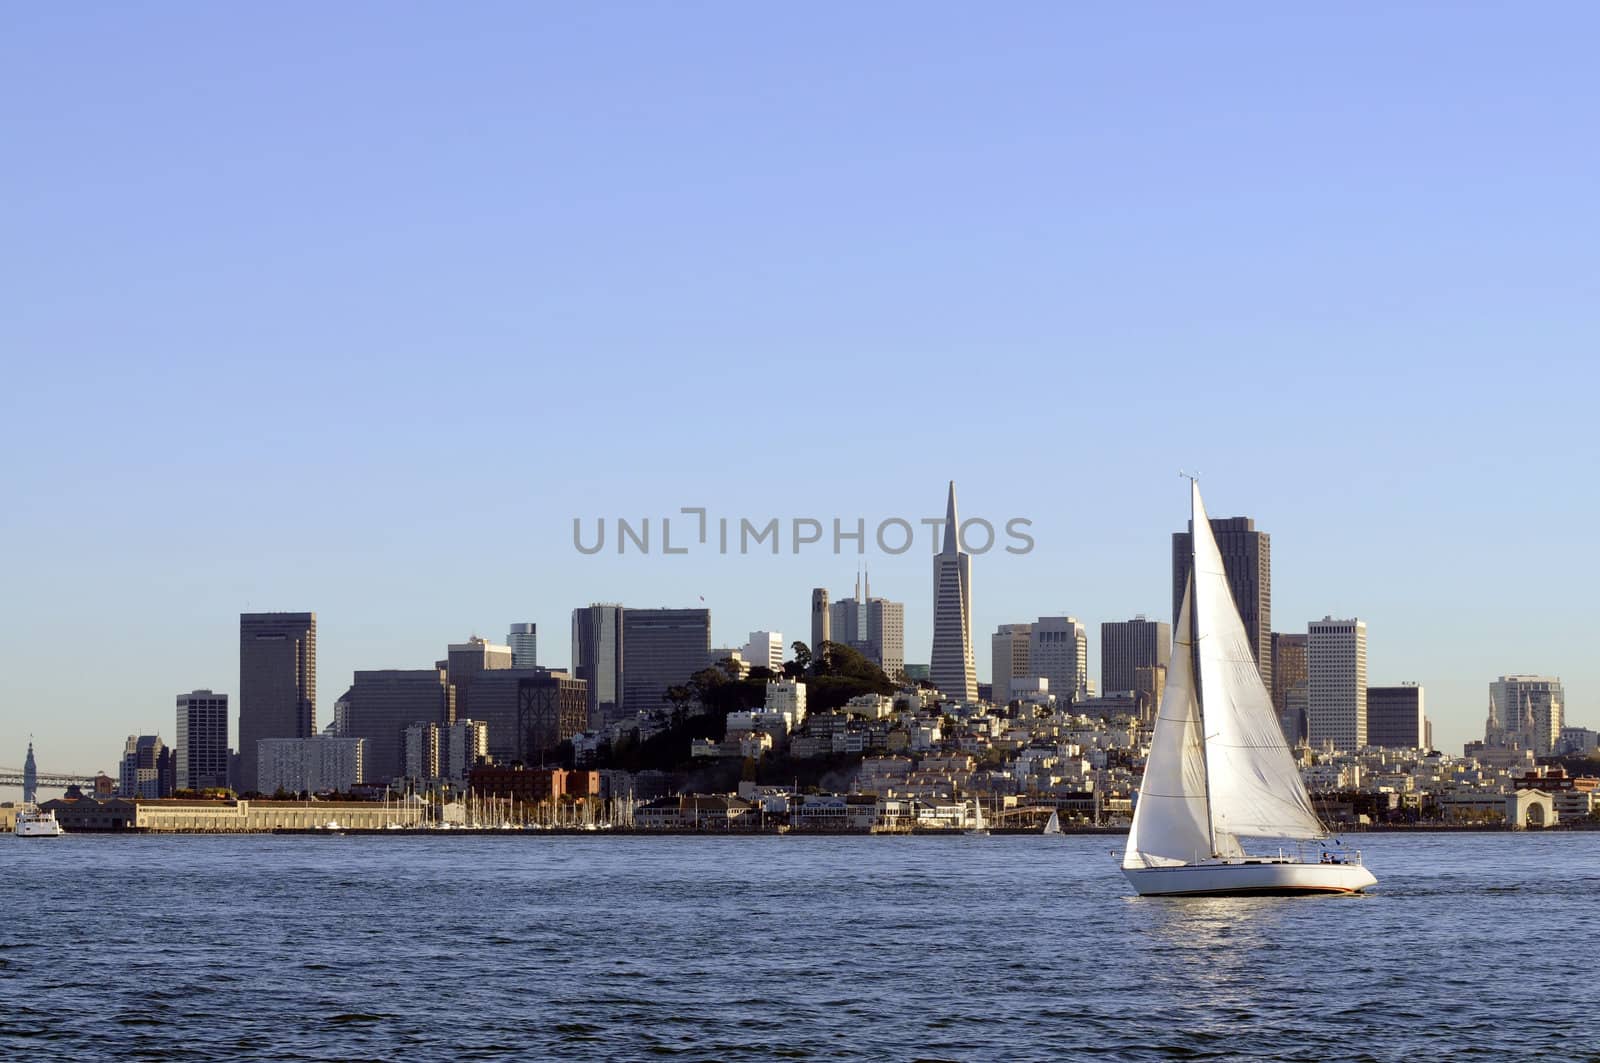 San Francisco Skyline at sunset coming into port, with a sailboat crossing the bow